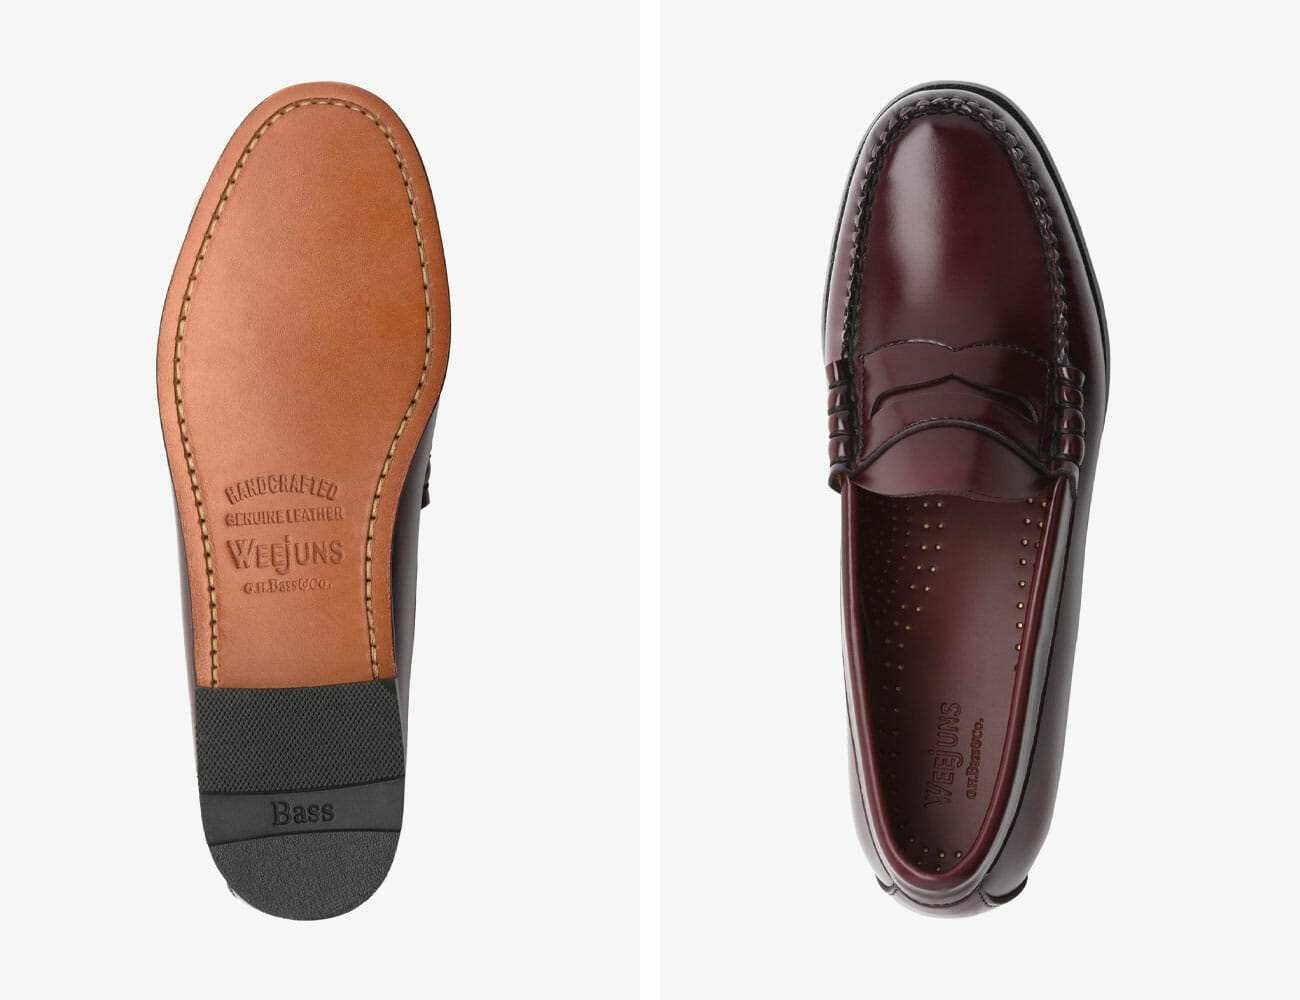 Which Penny Loafers Should You Buy?